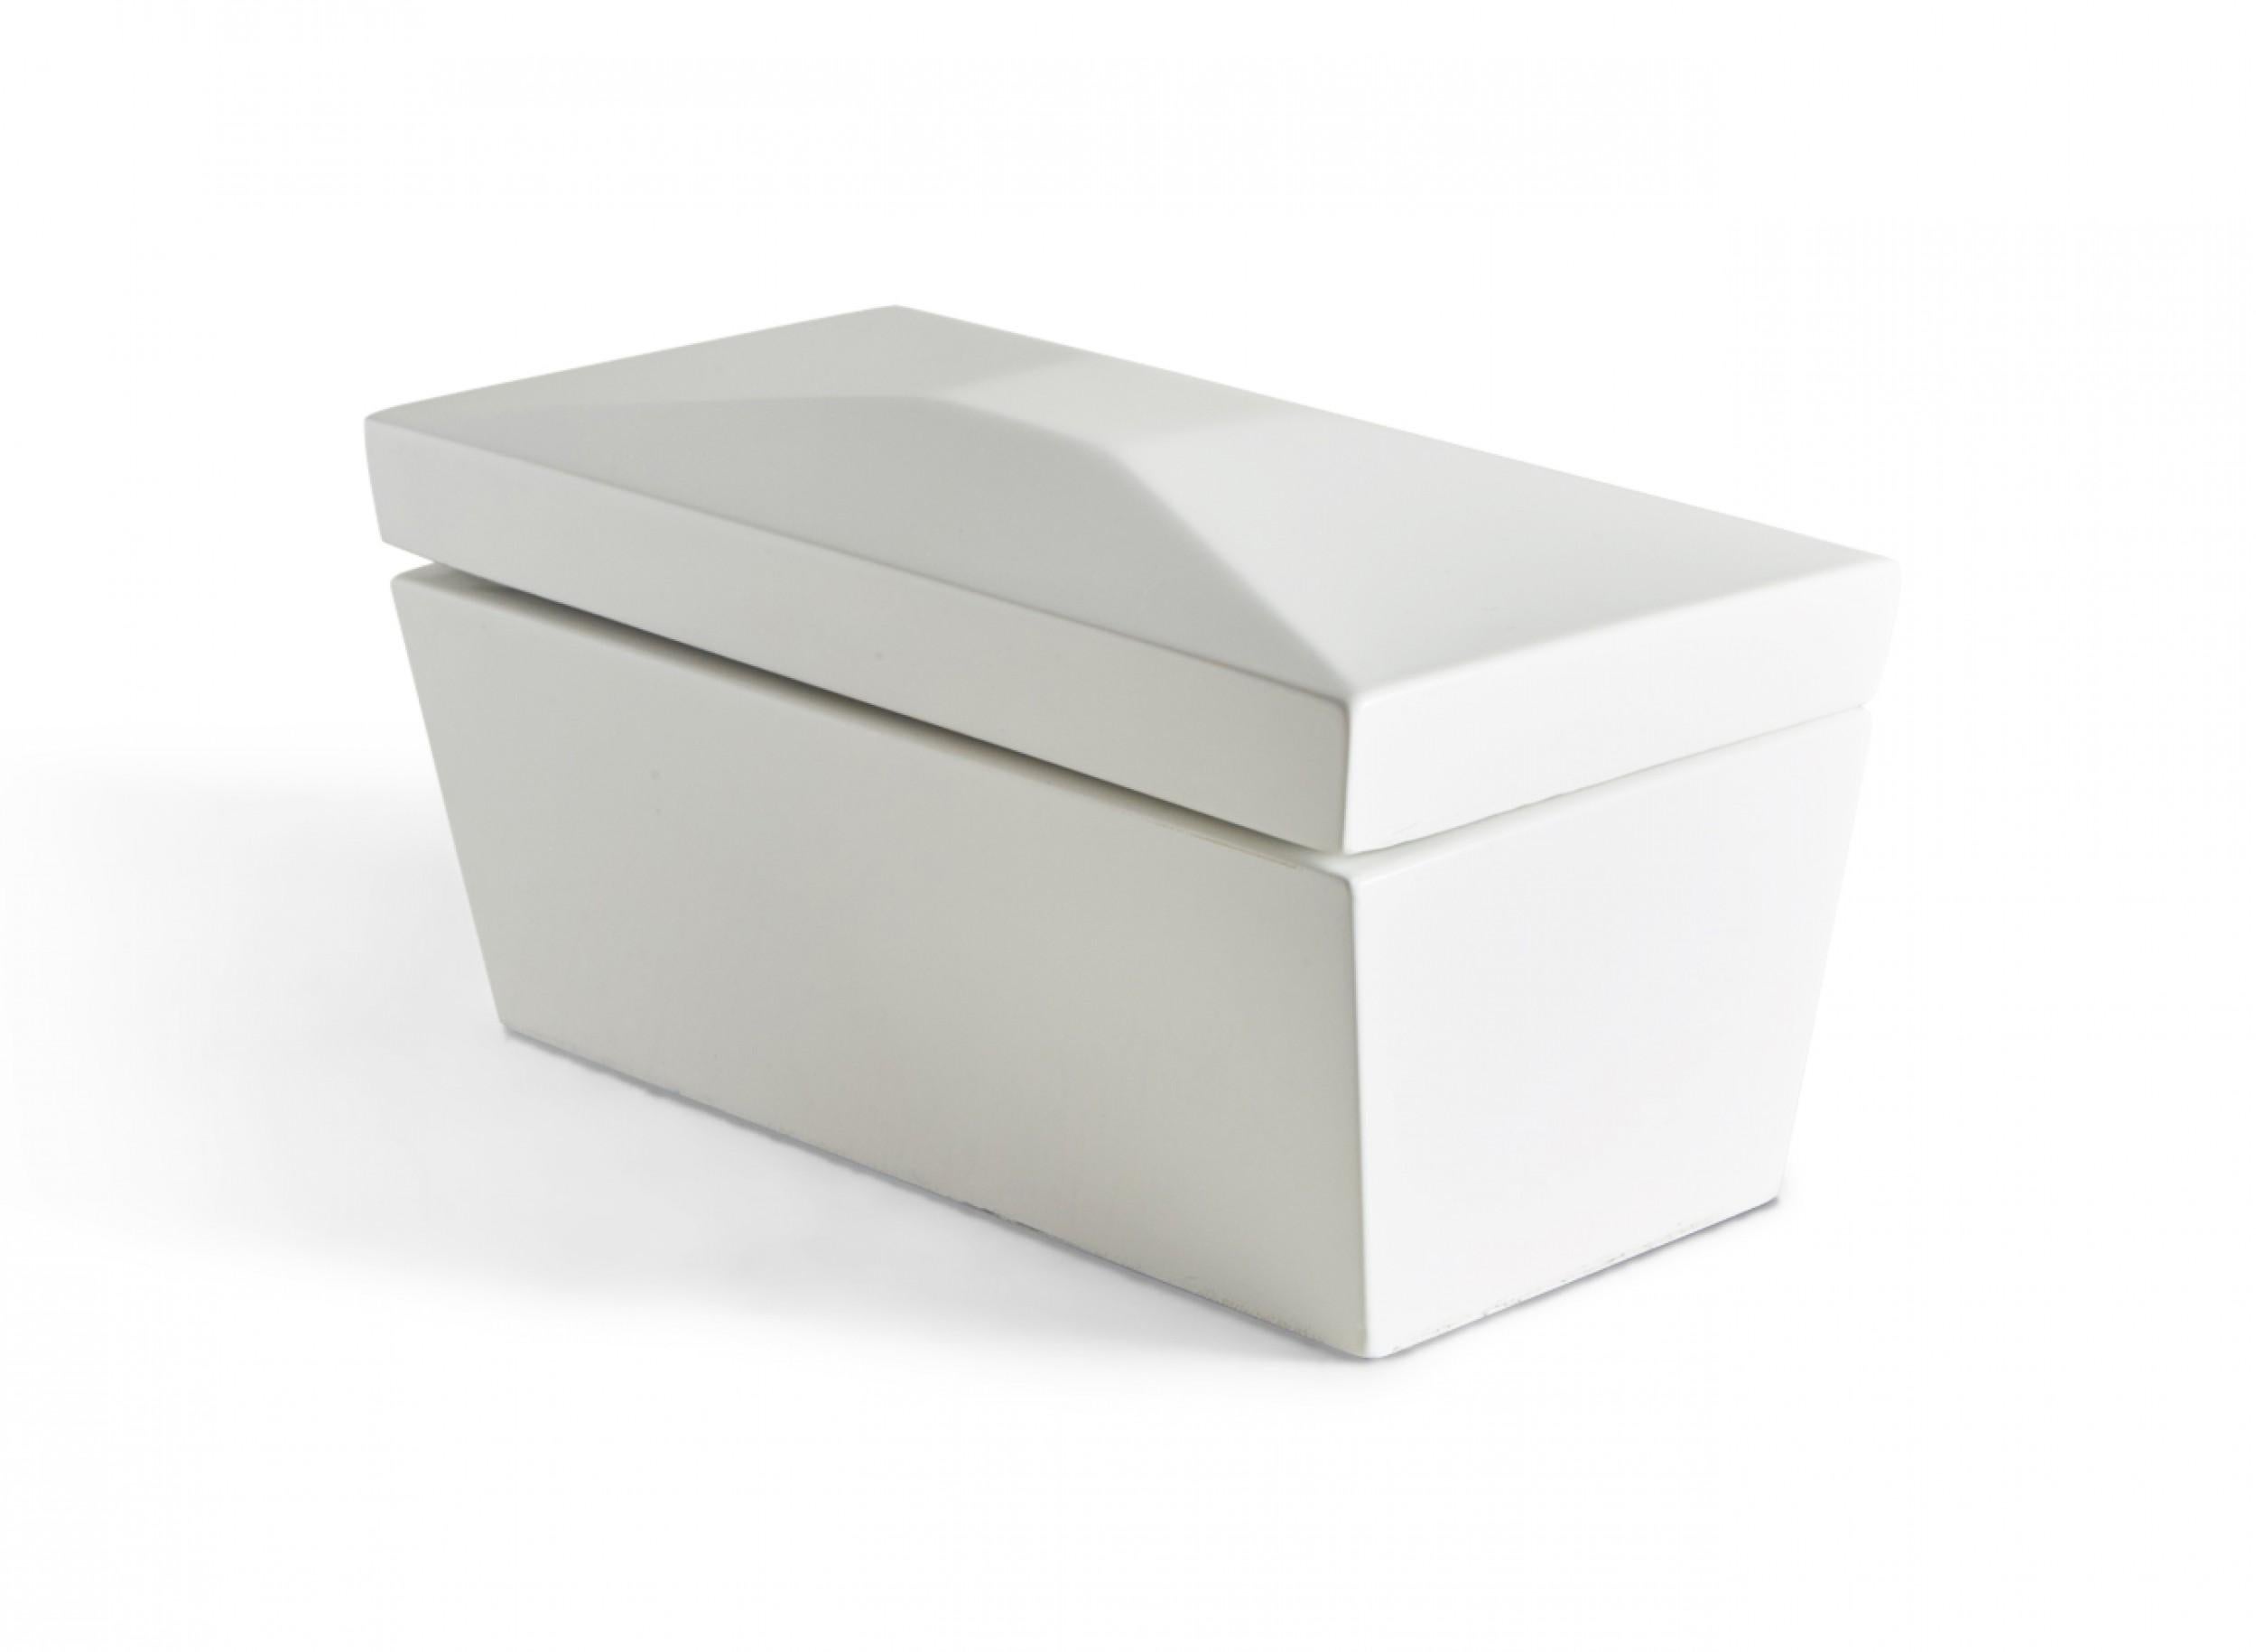 Contemporary decorative wooden box with a white lacquer finish, a rectangular profile with faceted lid and tapered sides, and a brass-hinged lid that opens to reveal two interior compartments covered with white lacquered wooden square lids with